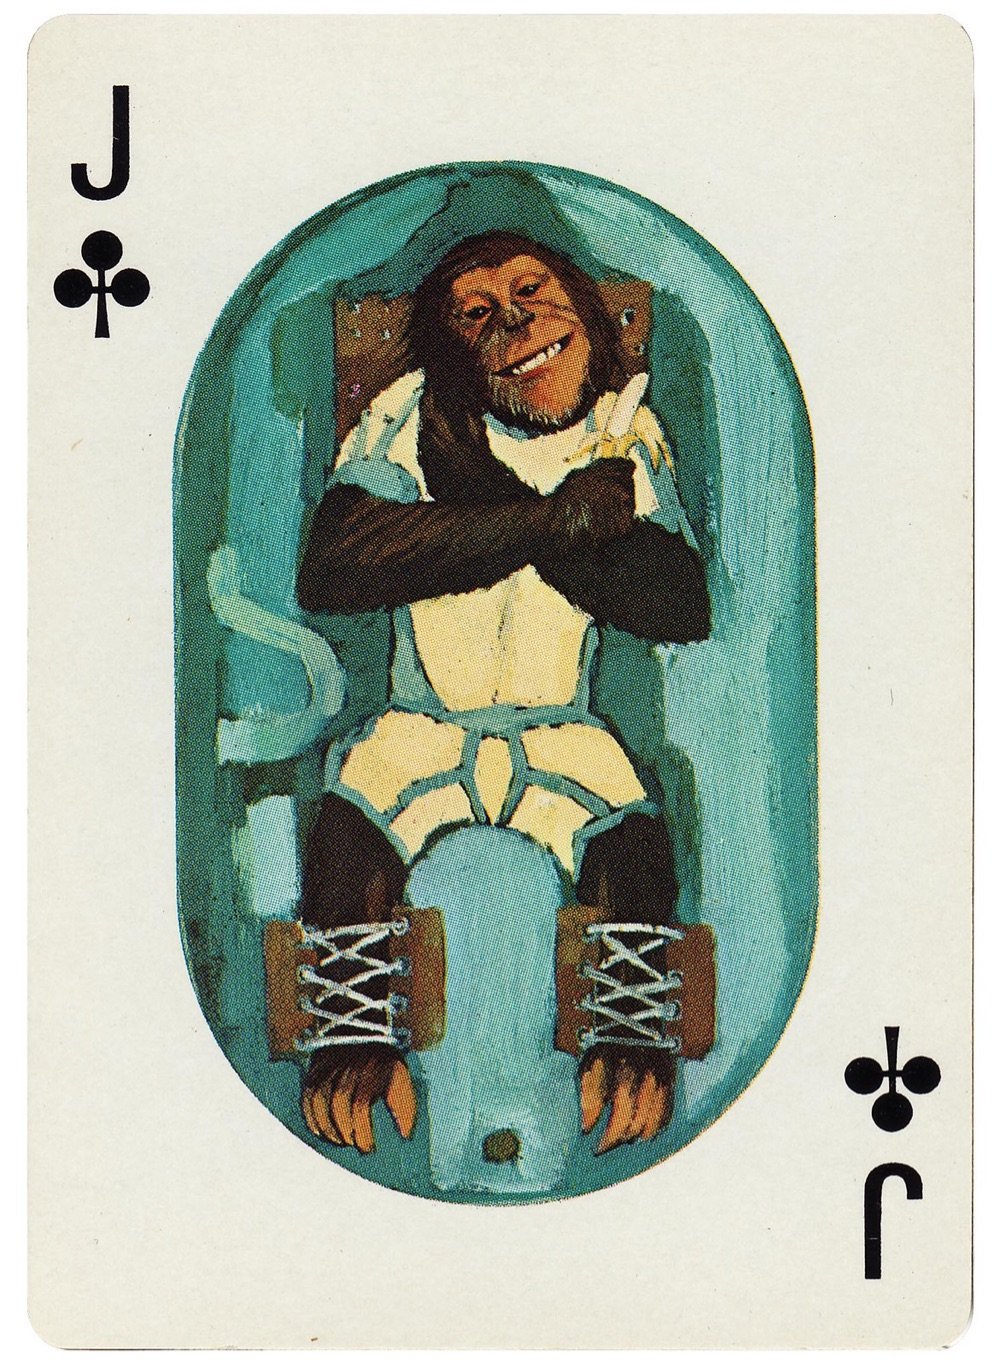 jack of clubs playing card with a space monkey eating a banana on it